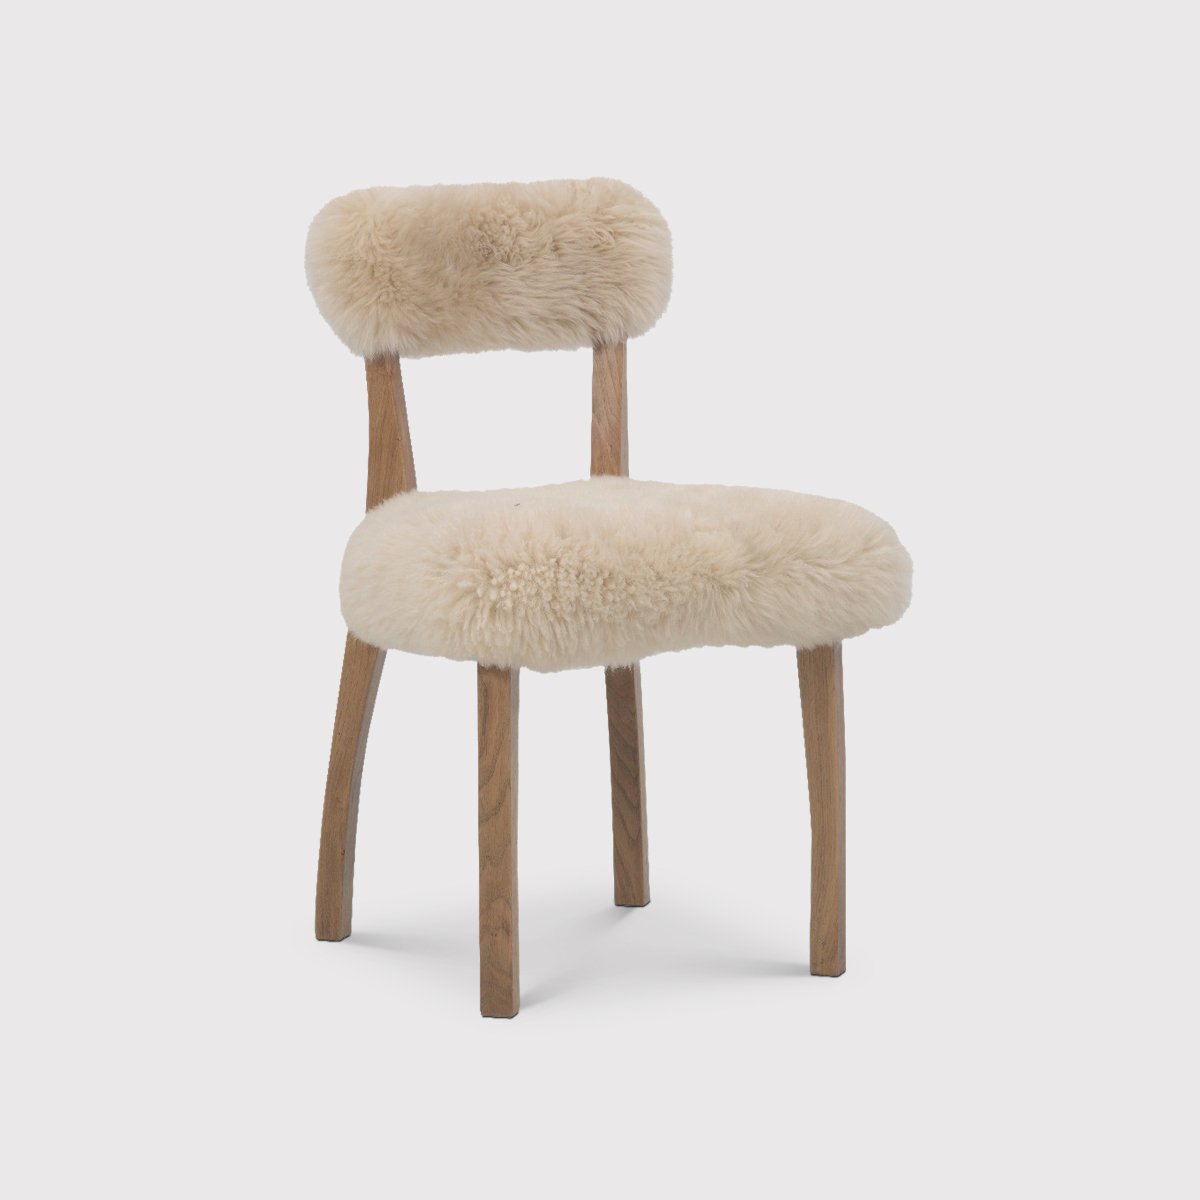 Timothy Oulton Cabin Dining Chair, Neutral | Barker & Stonehouse